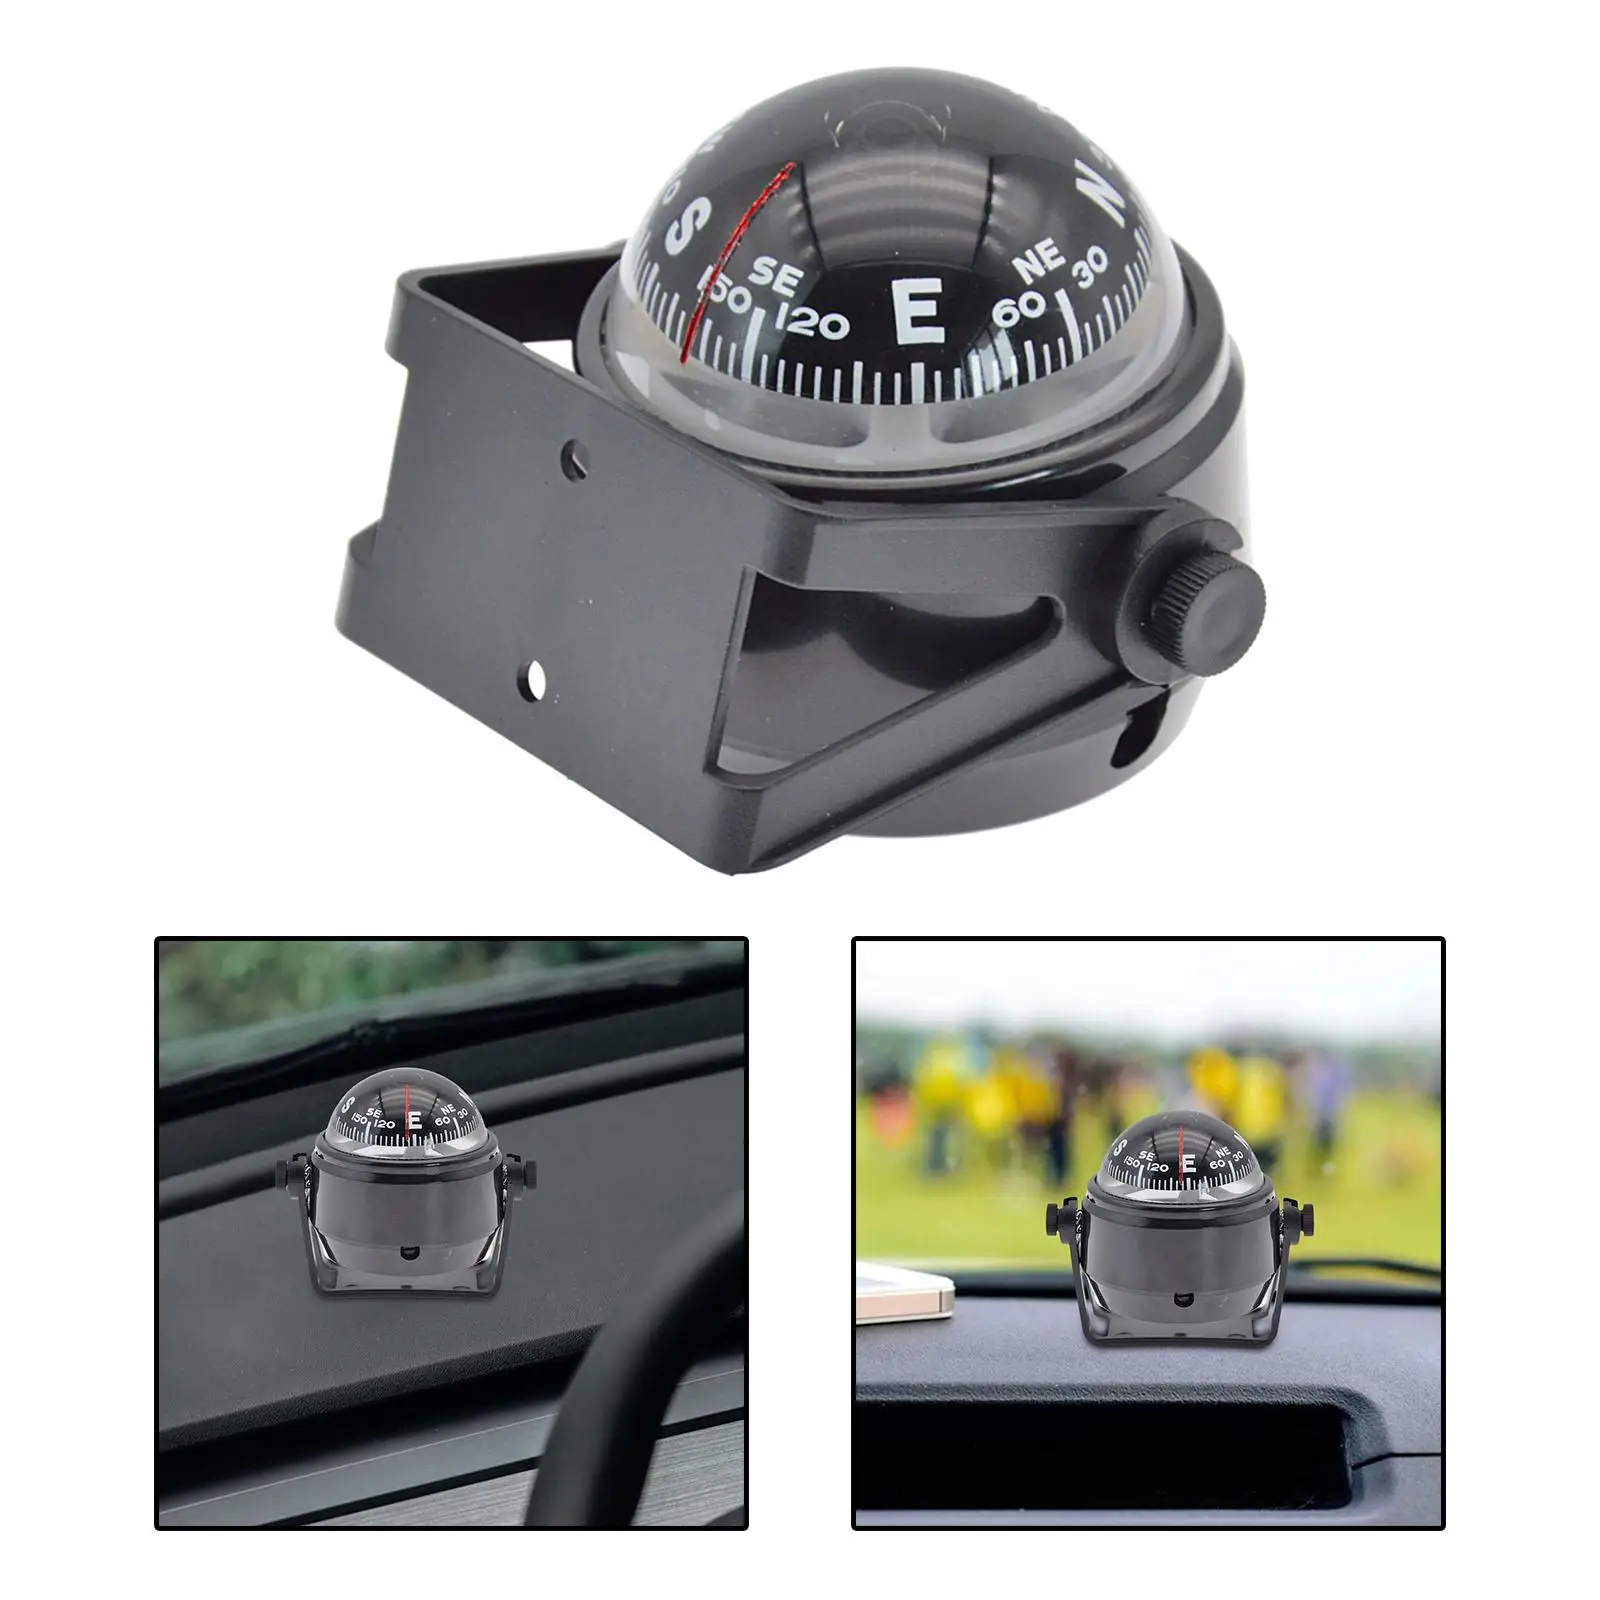 Car Compass Ball High Accuracy Automotive  Navigation Direction Pointing  Compass for Marine Boat Golf Cart Hiking